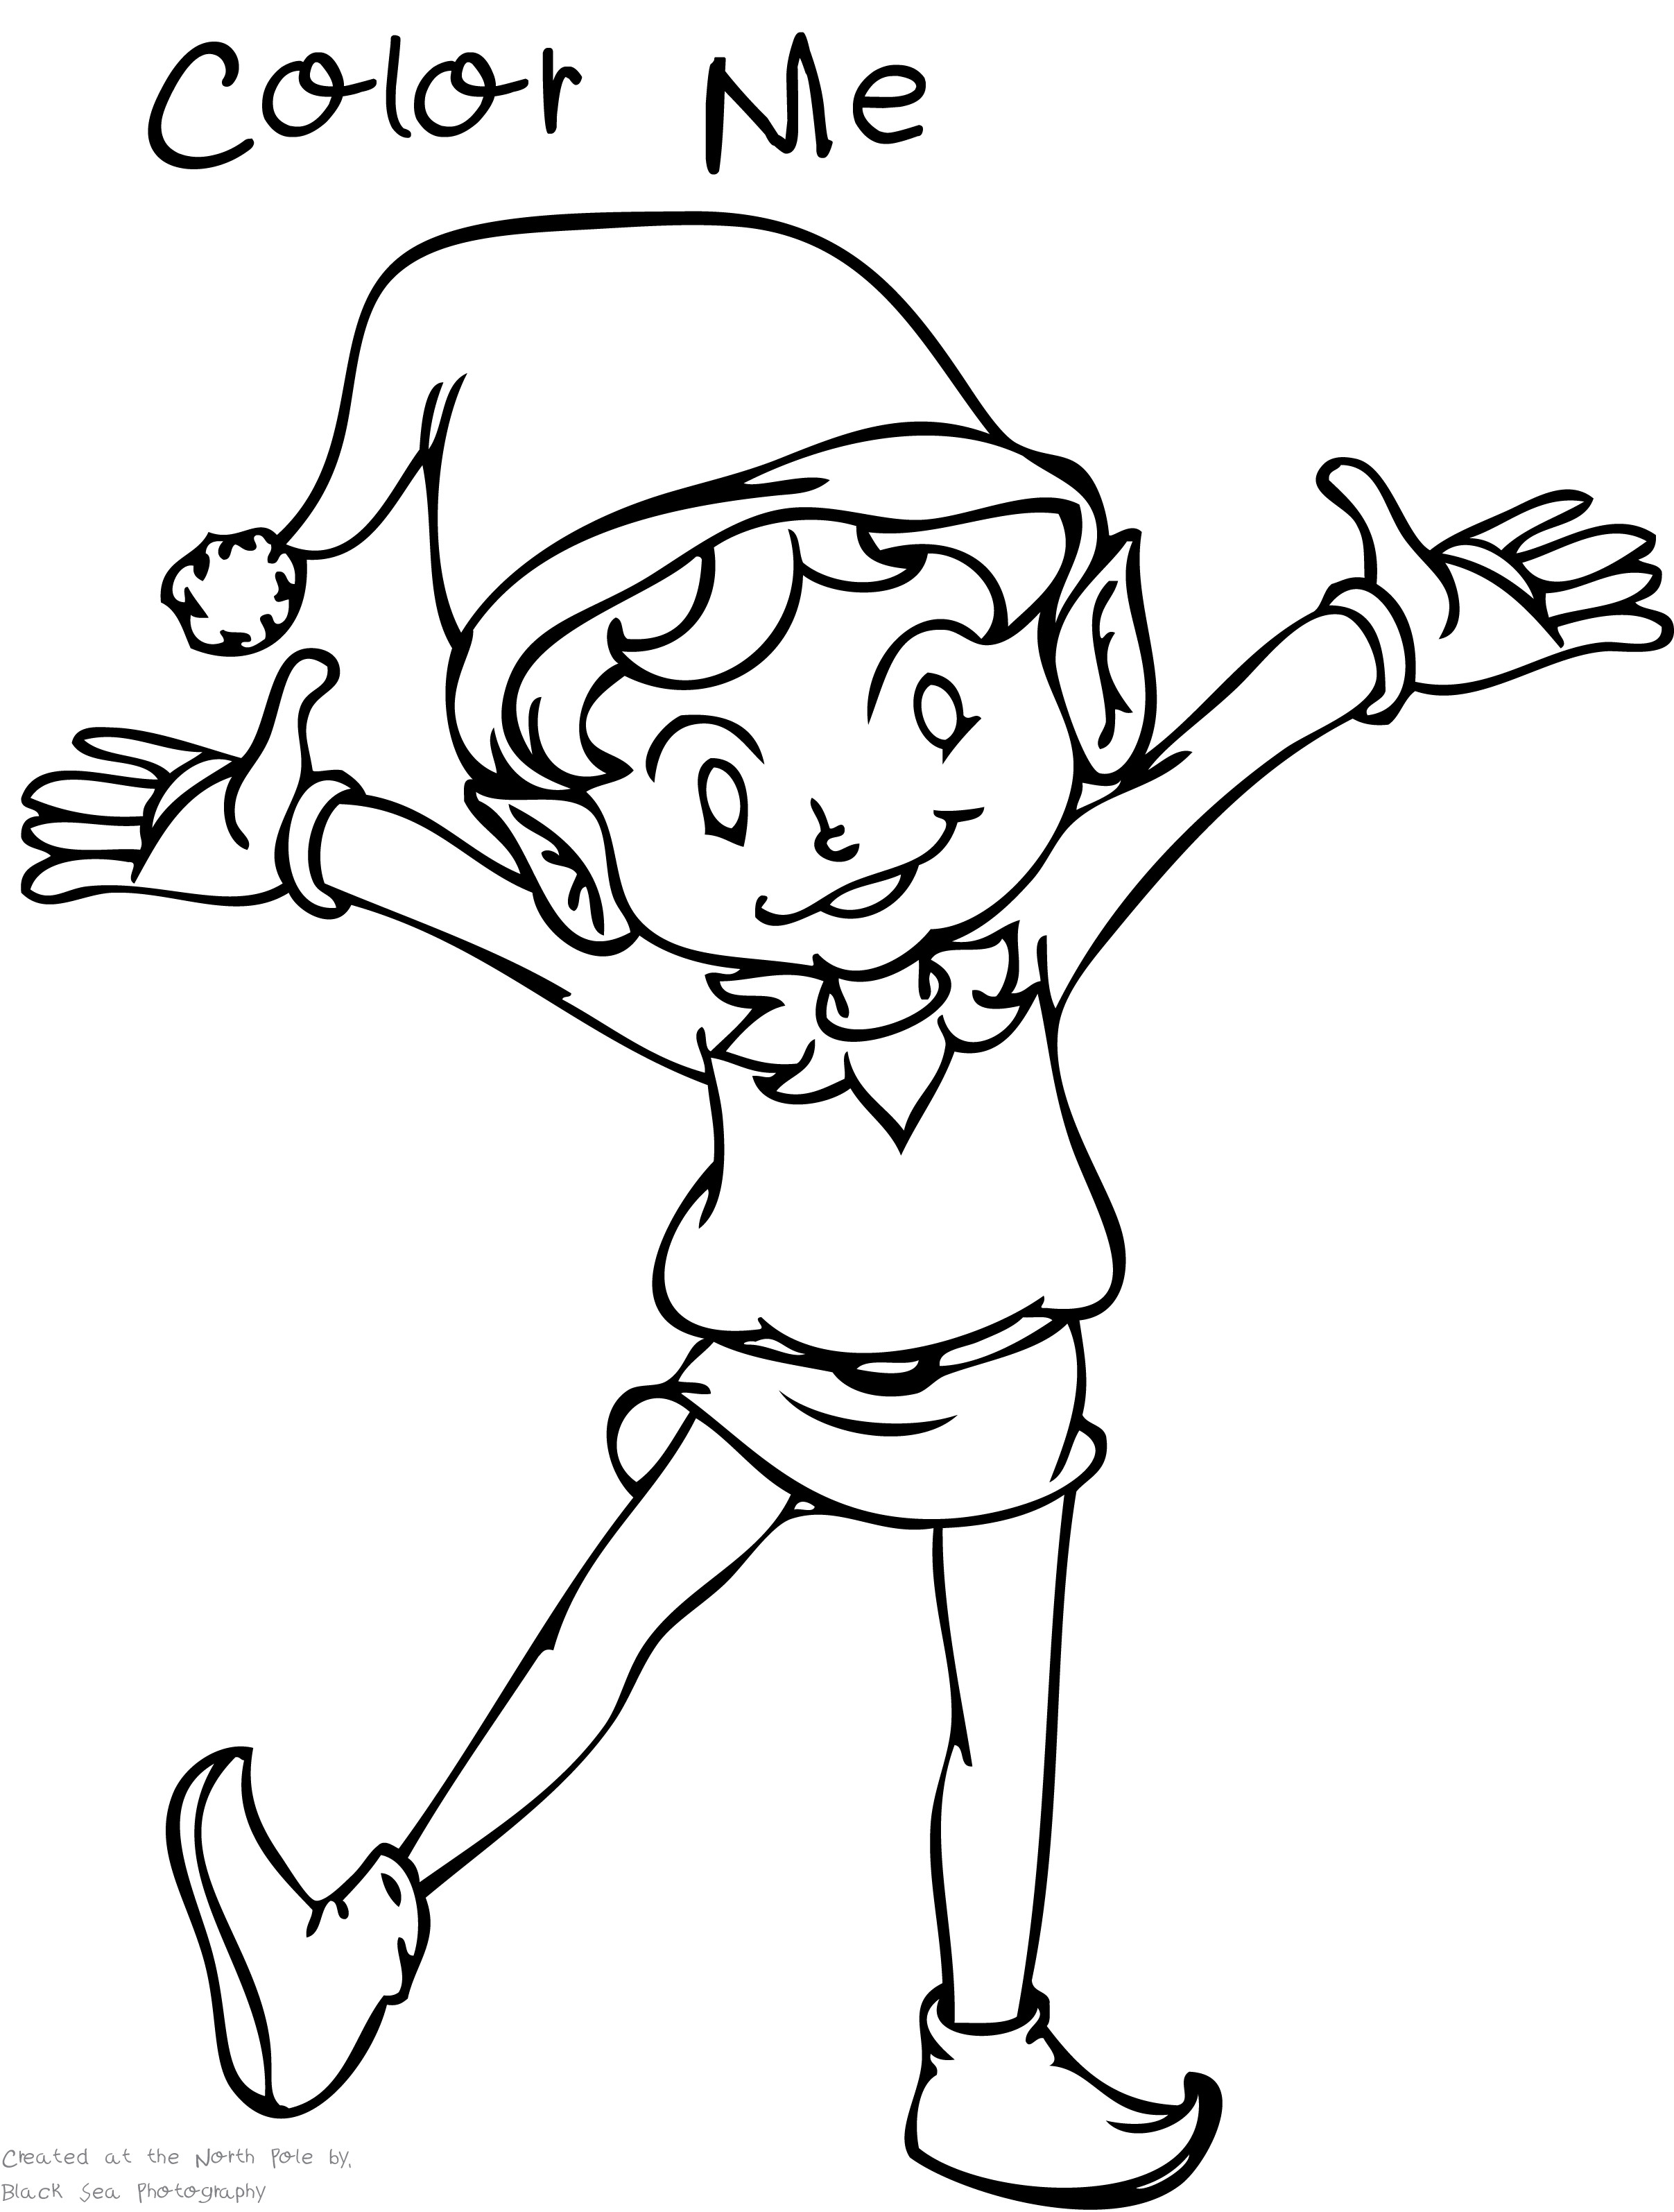 Elf Coloring Pages Printable
 Elf on the shelf coloring pages